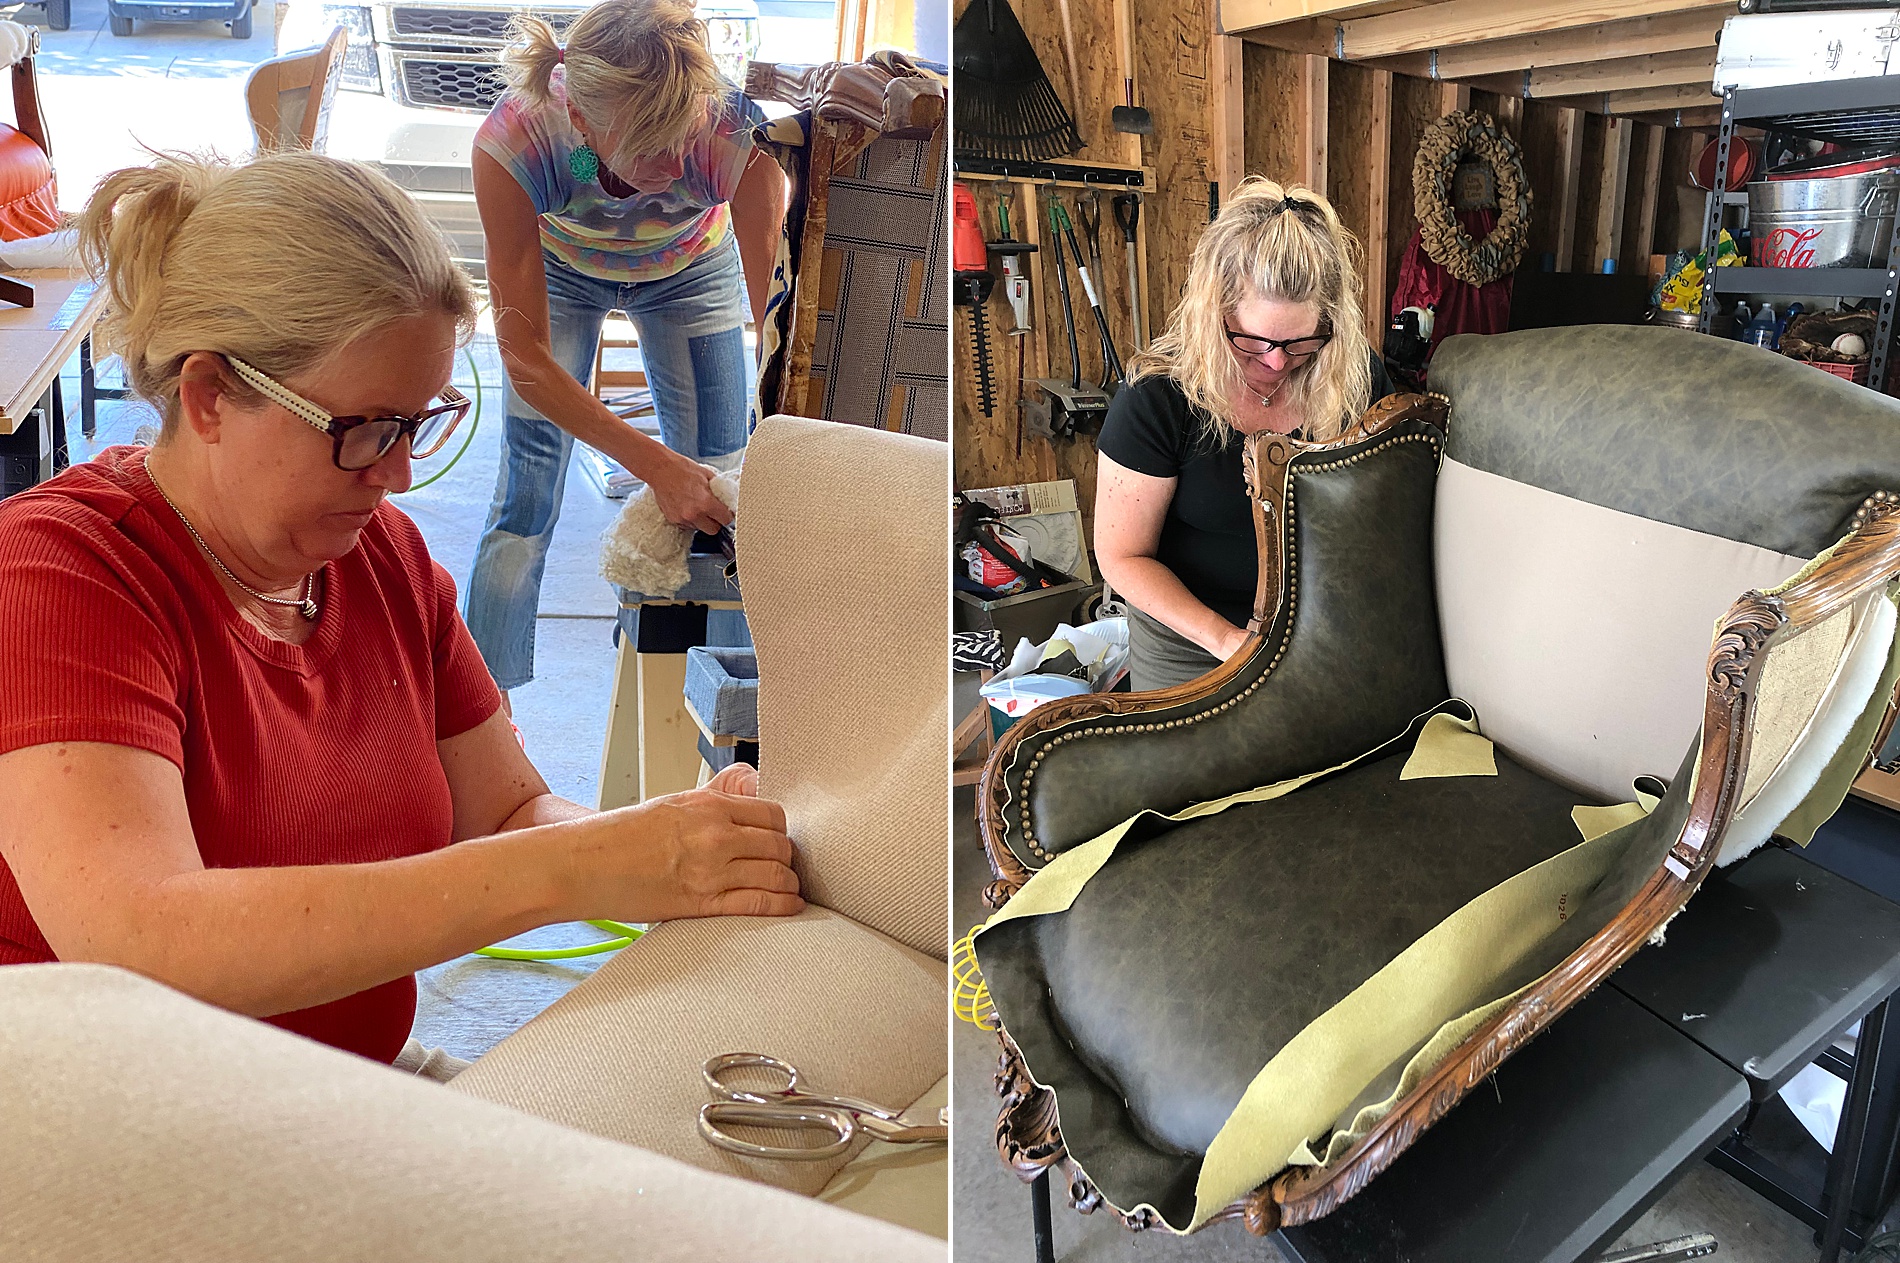 One of the lives we've touched learning upholstery and slipcovers